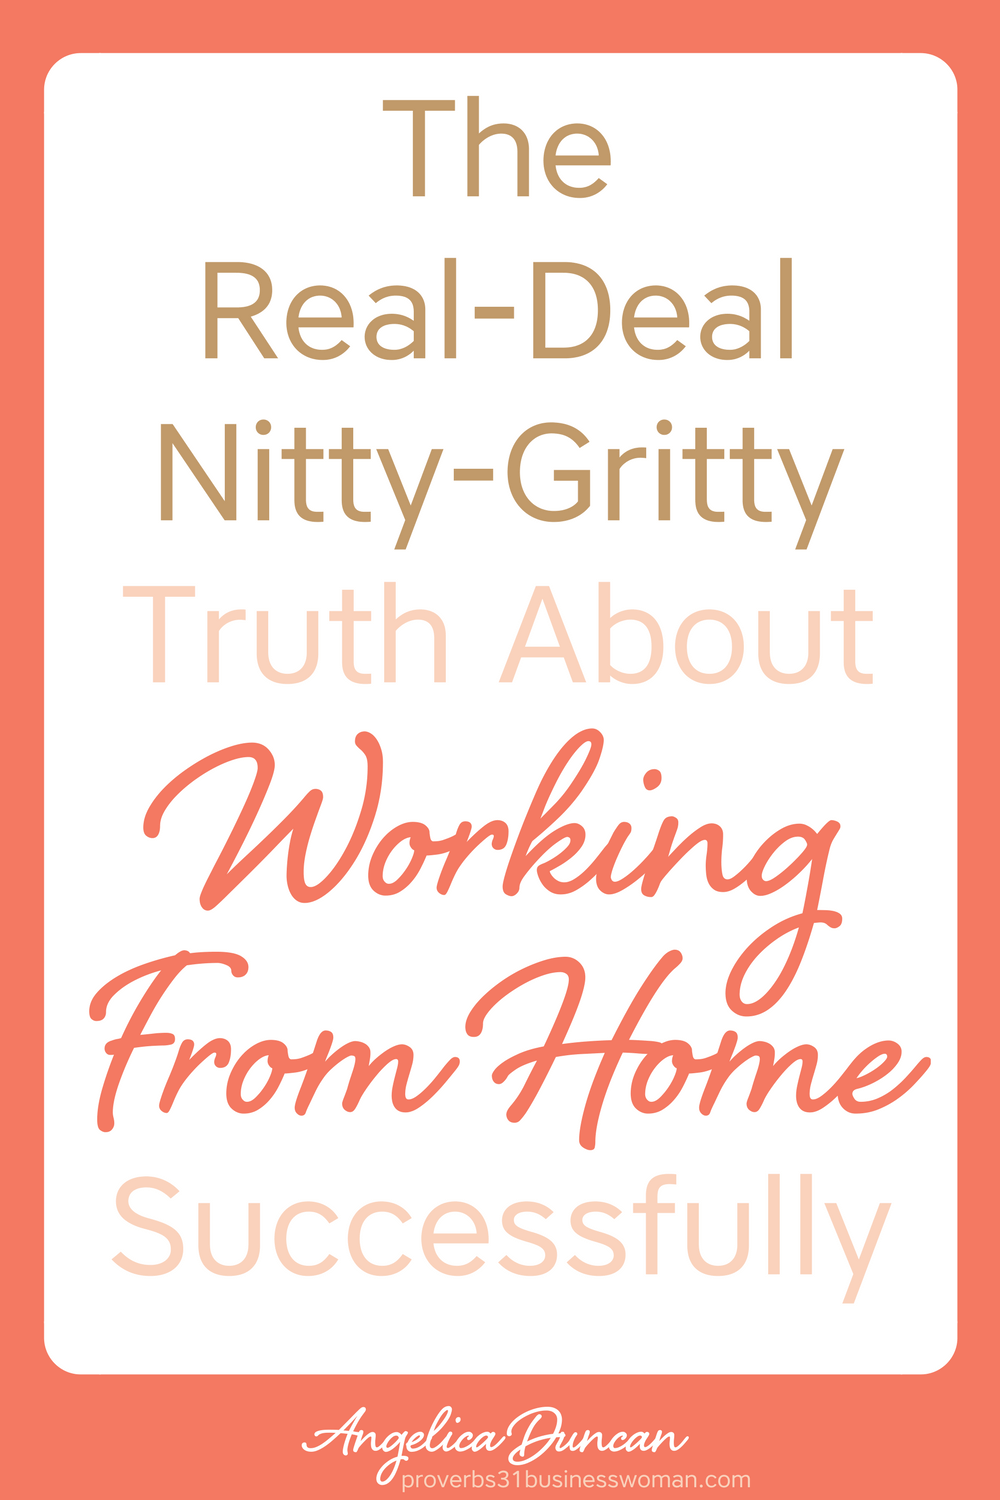 Working from home successfully is more than just a glammed up pipe dream. It takes a lot of dedication and discipline. Let me share some insights with you! #mompreneur #onlinebusiness #wahm #womeninbusiness #christianbusiness #christianwomeninbusiness #christianentrepreneurs #proverbs31 #proverbs31woman #proverbs31businesswoman #proverbs31enrepreneur #p31 #angelicaduncan #silkoversteel #sos